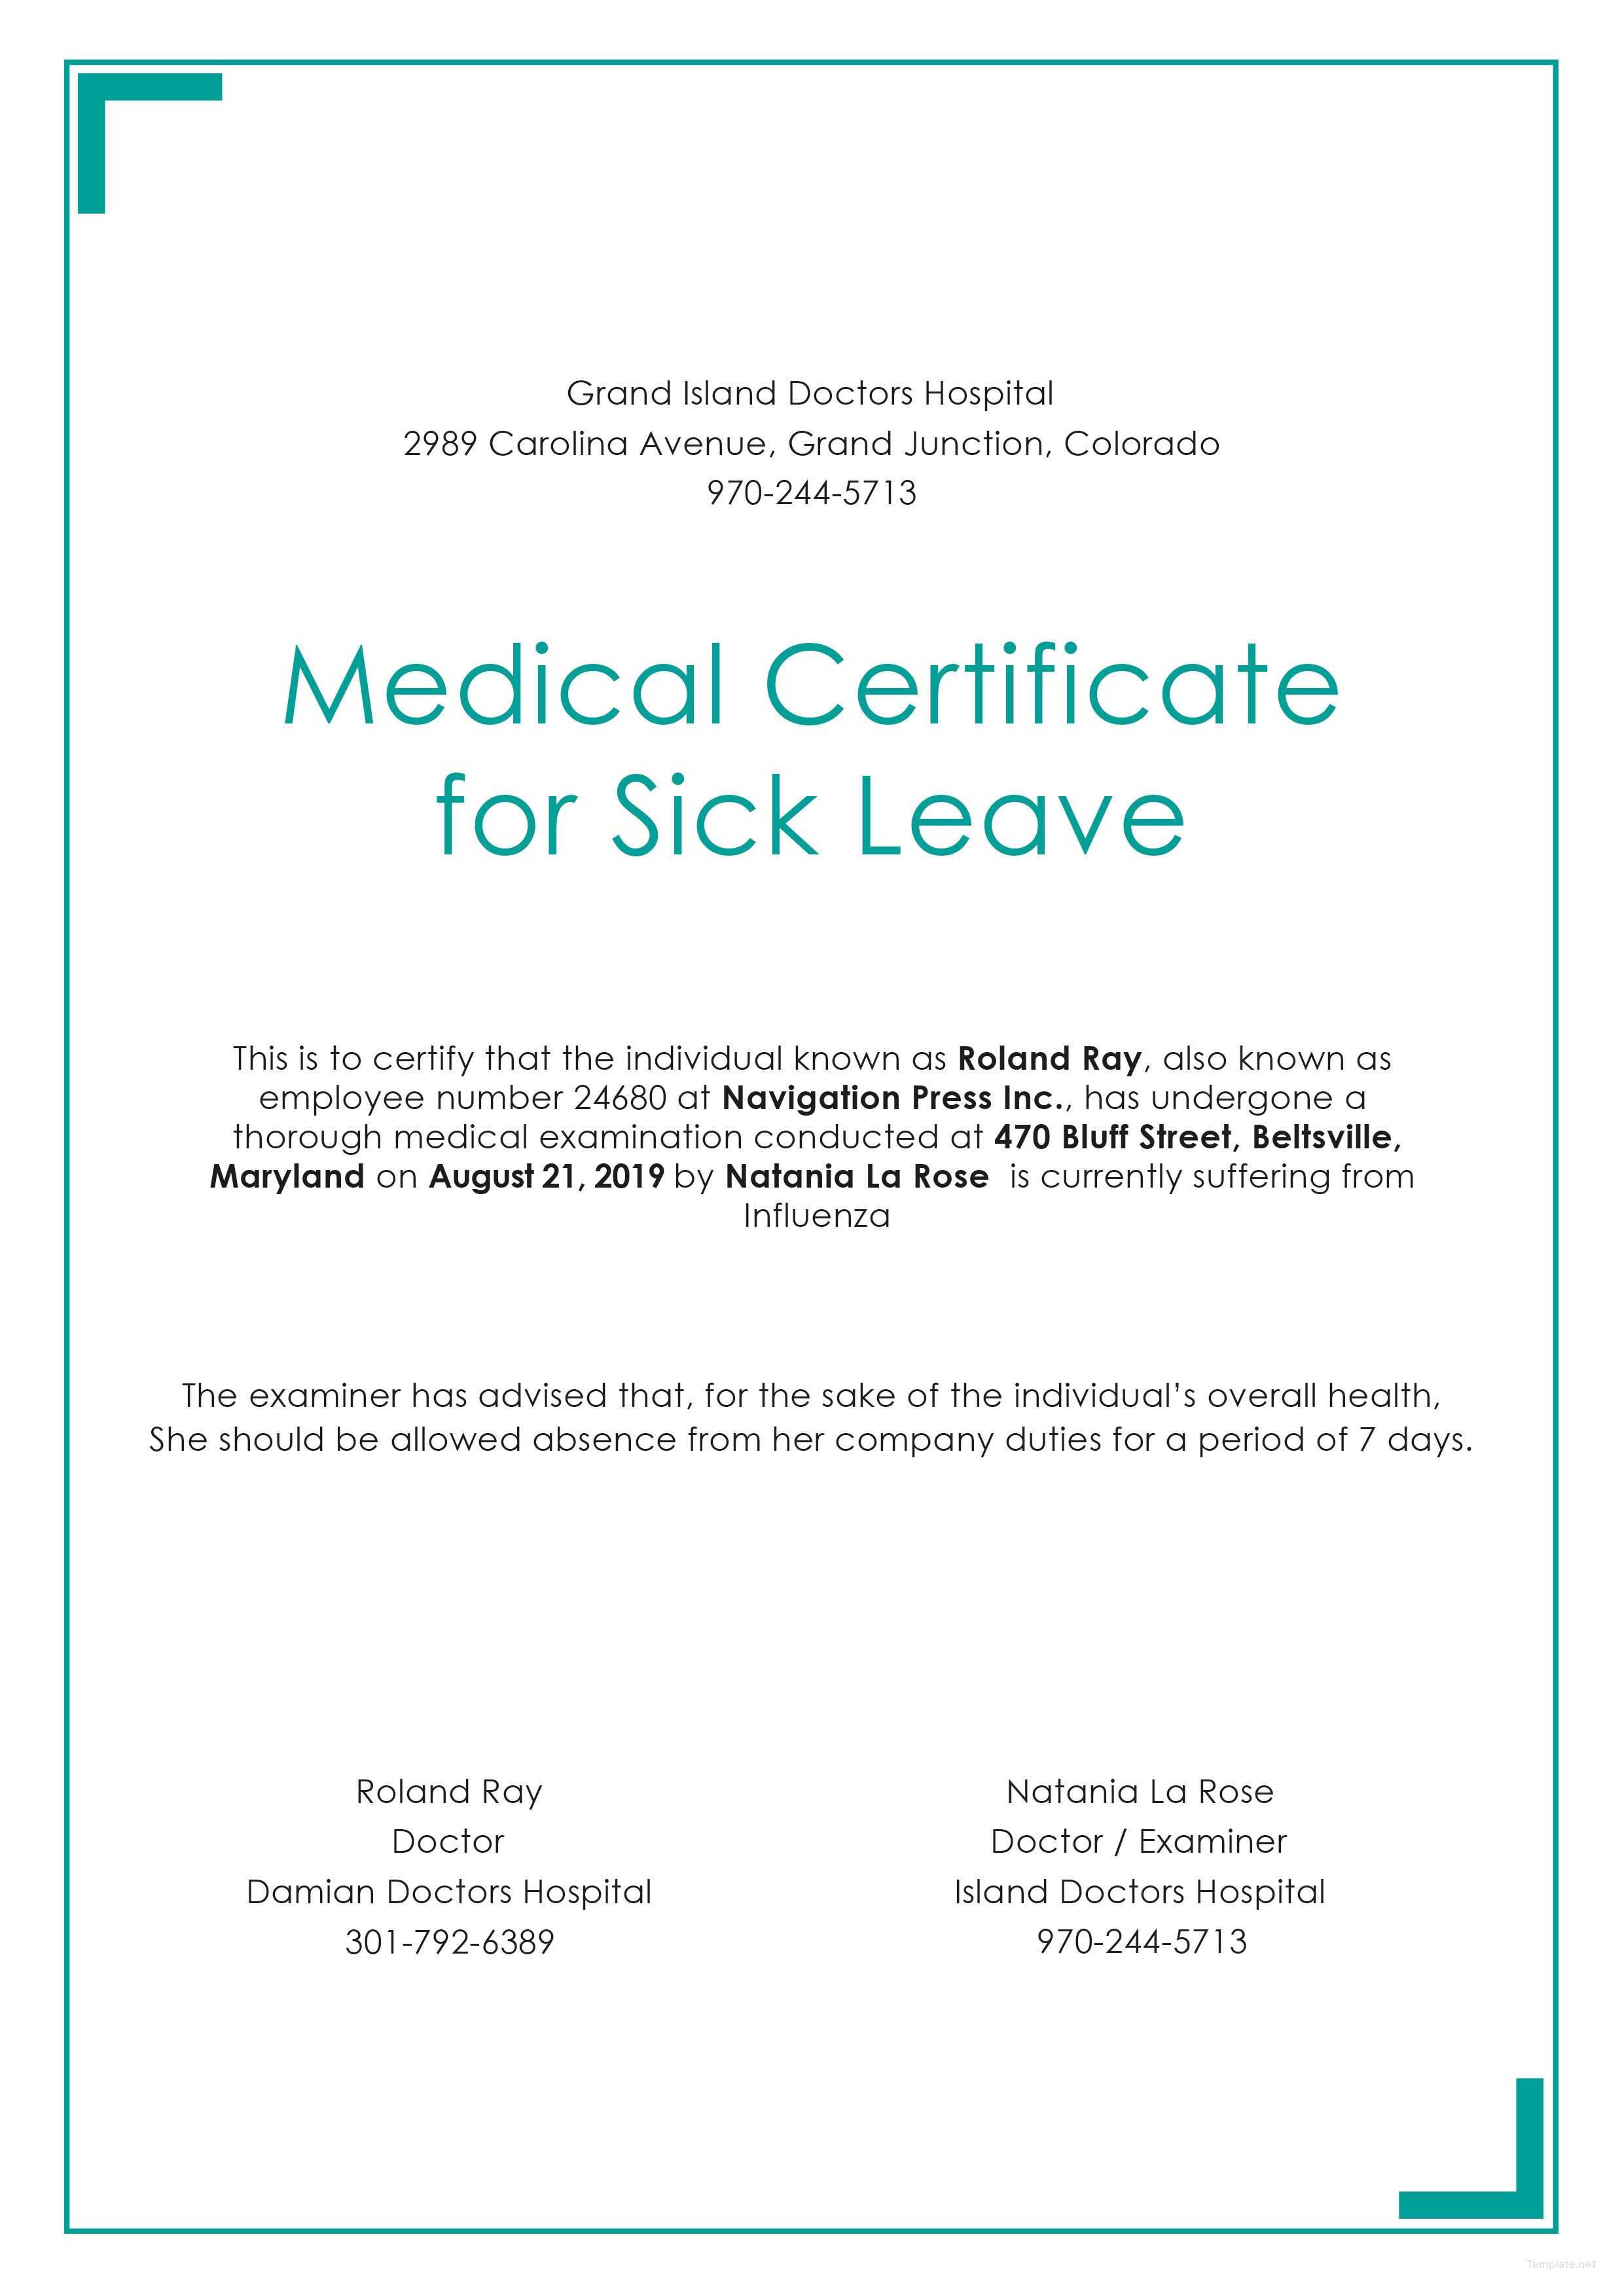 Free Medical Certificate For Sick Leave | Medical, Doctors Intended For Australian Doctors Certificate Template